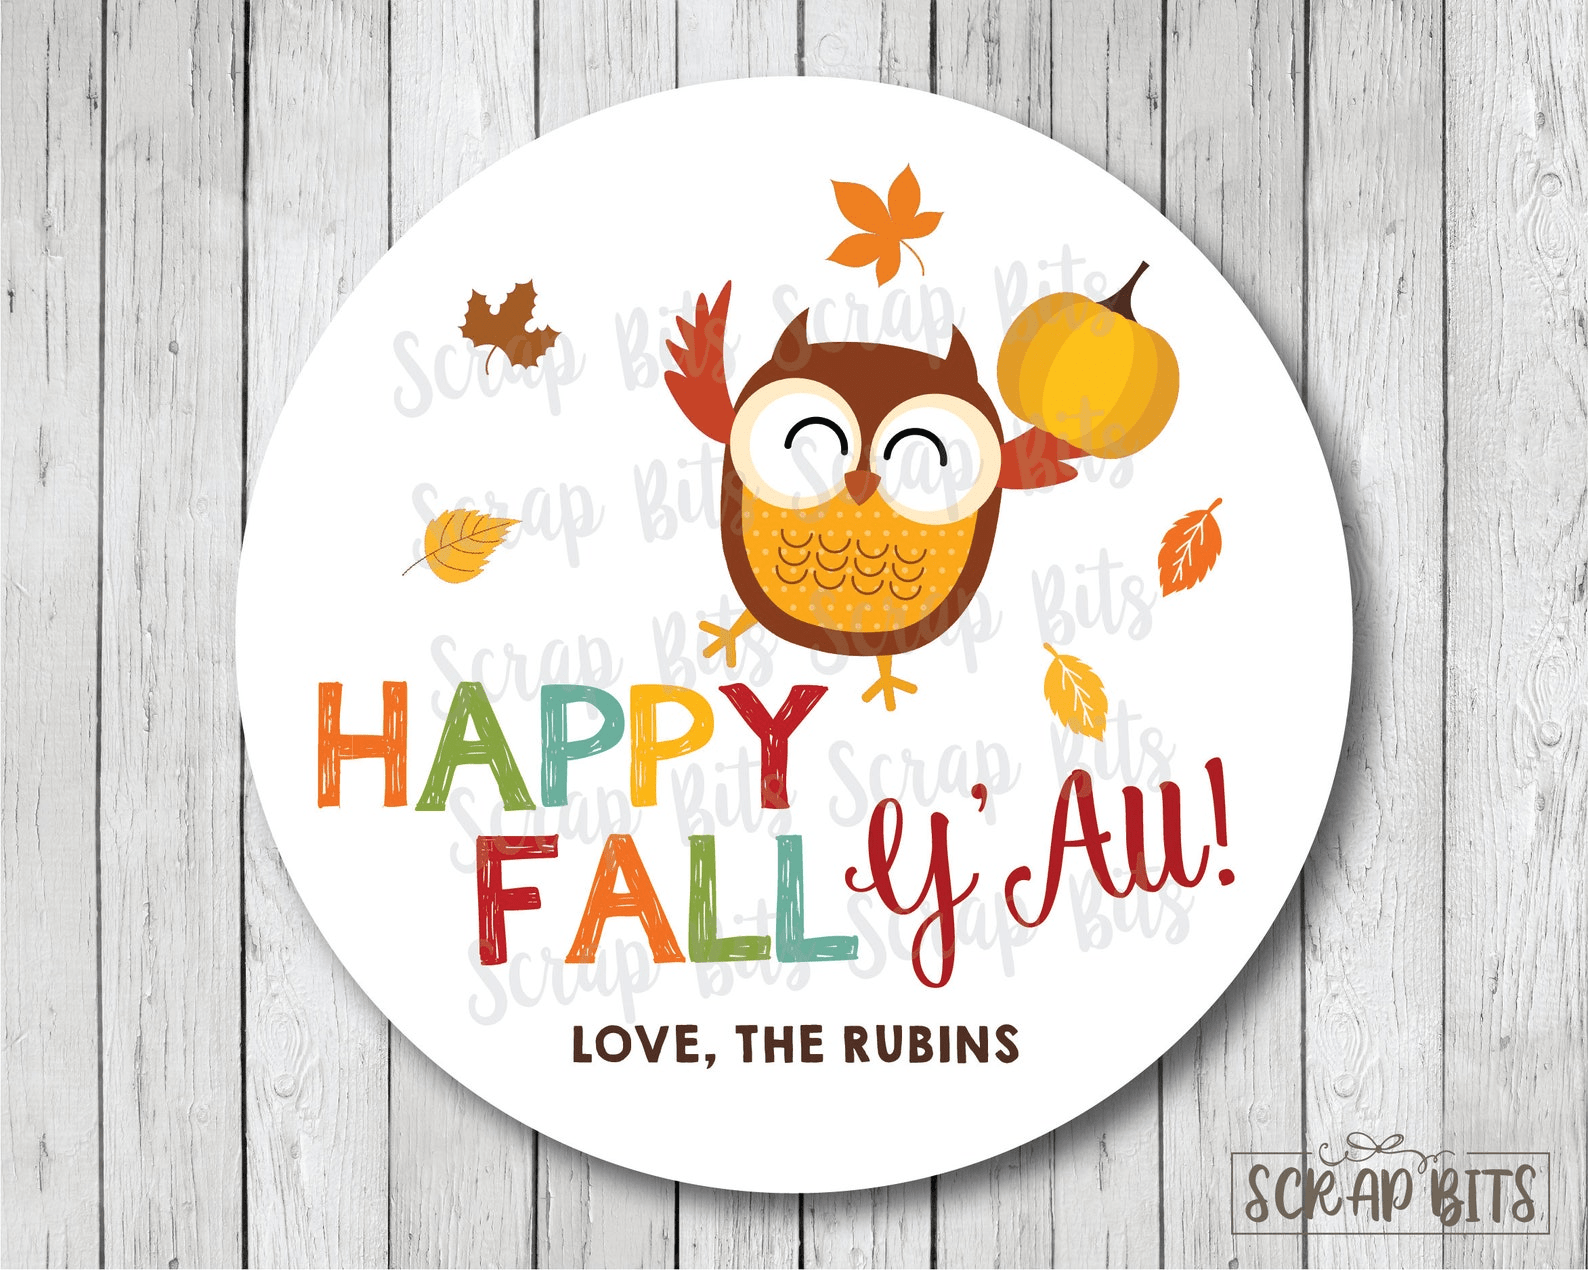 Dancing Owl Happy Fall Y'all Stickers or Tags - Scrap Bits